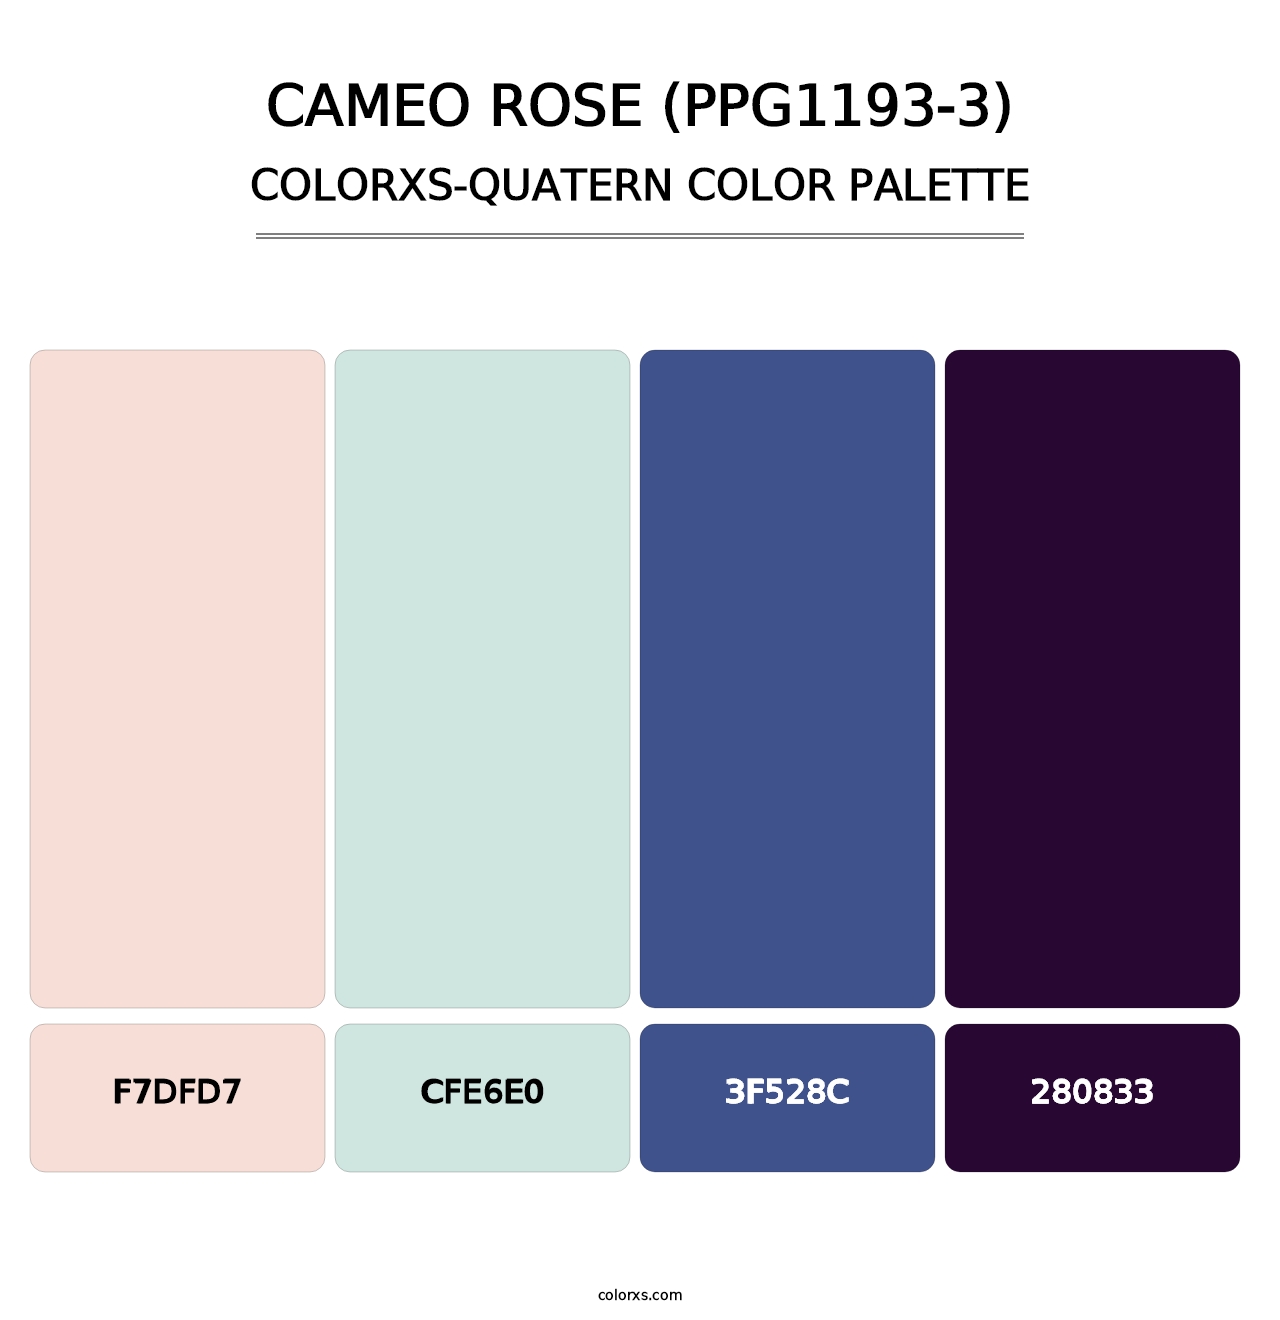 Cameo Rose (PPG1193-3) - Colorxs Quatern Palette